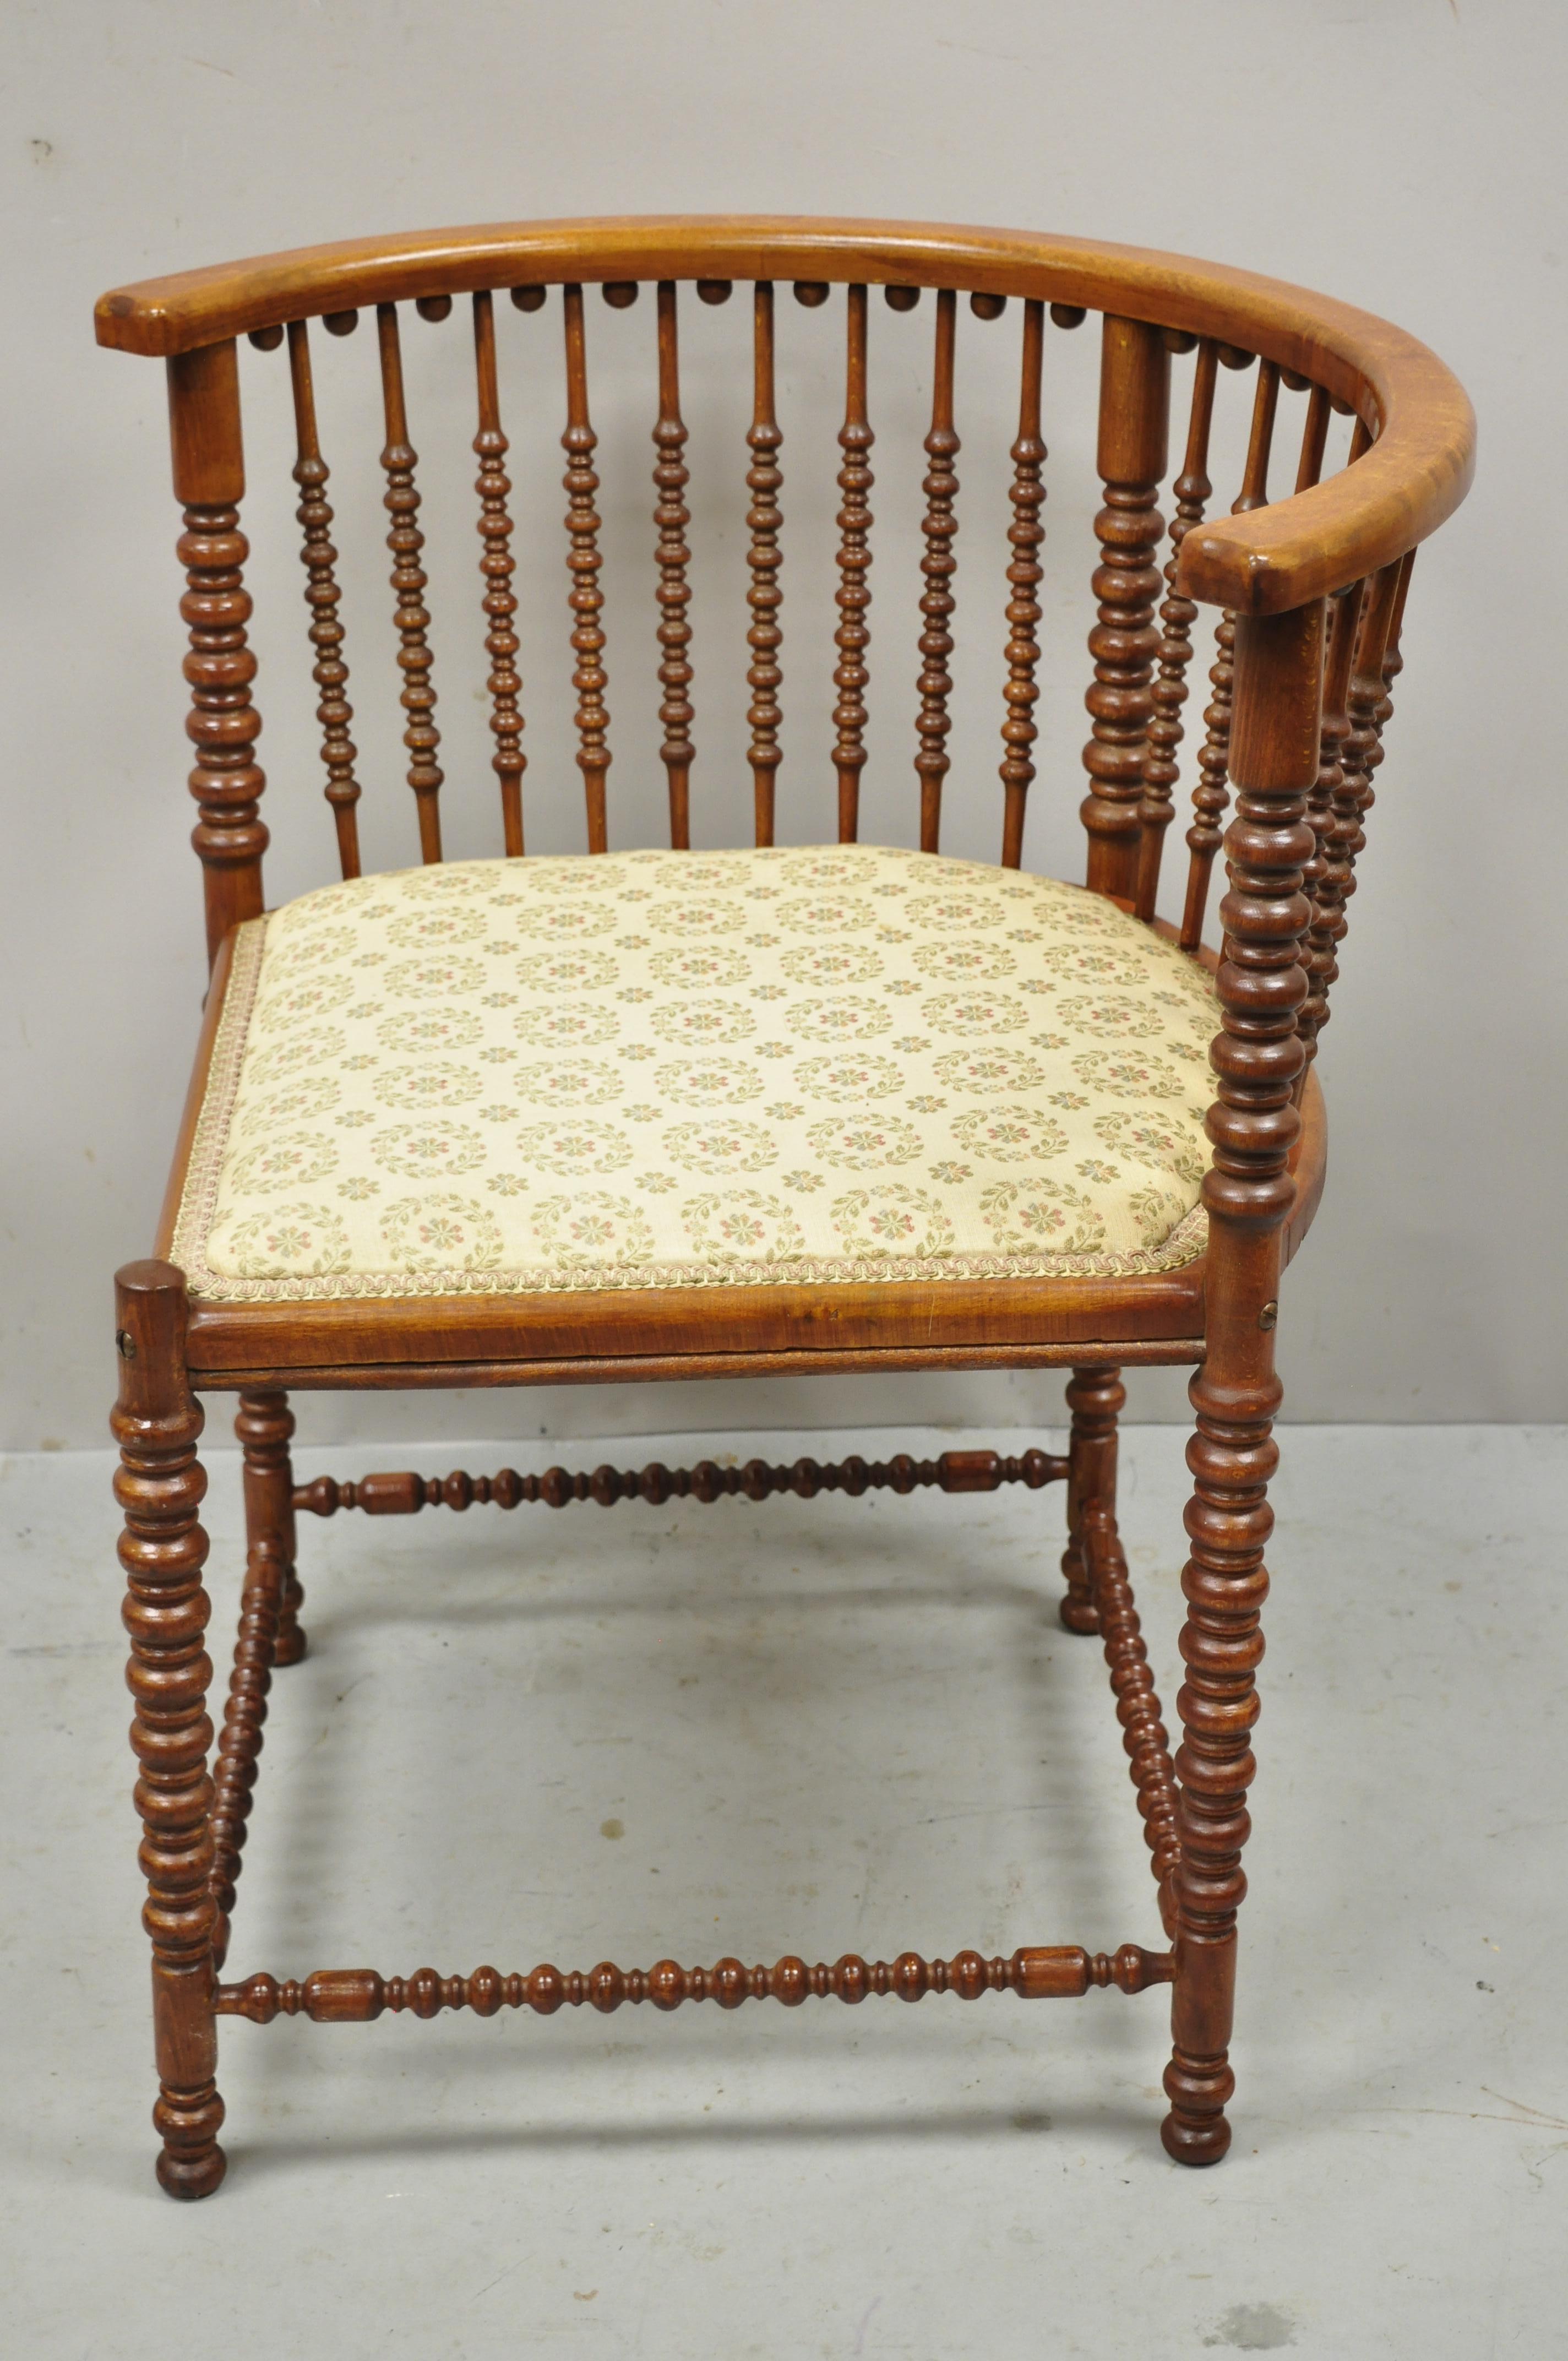 20th Century Antique Arts & Crafts Spool Carved Corner Chair Bobbin Chair Stick and Ball